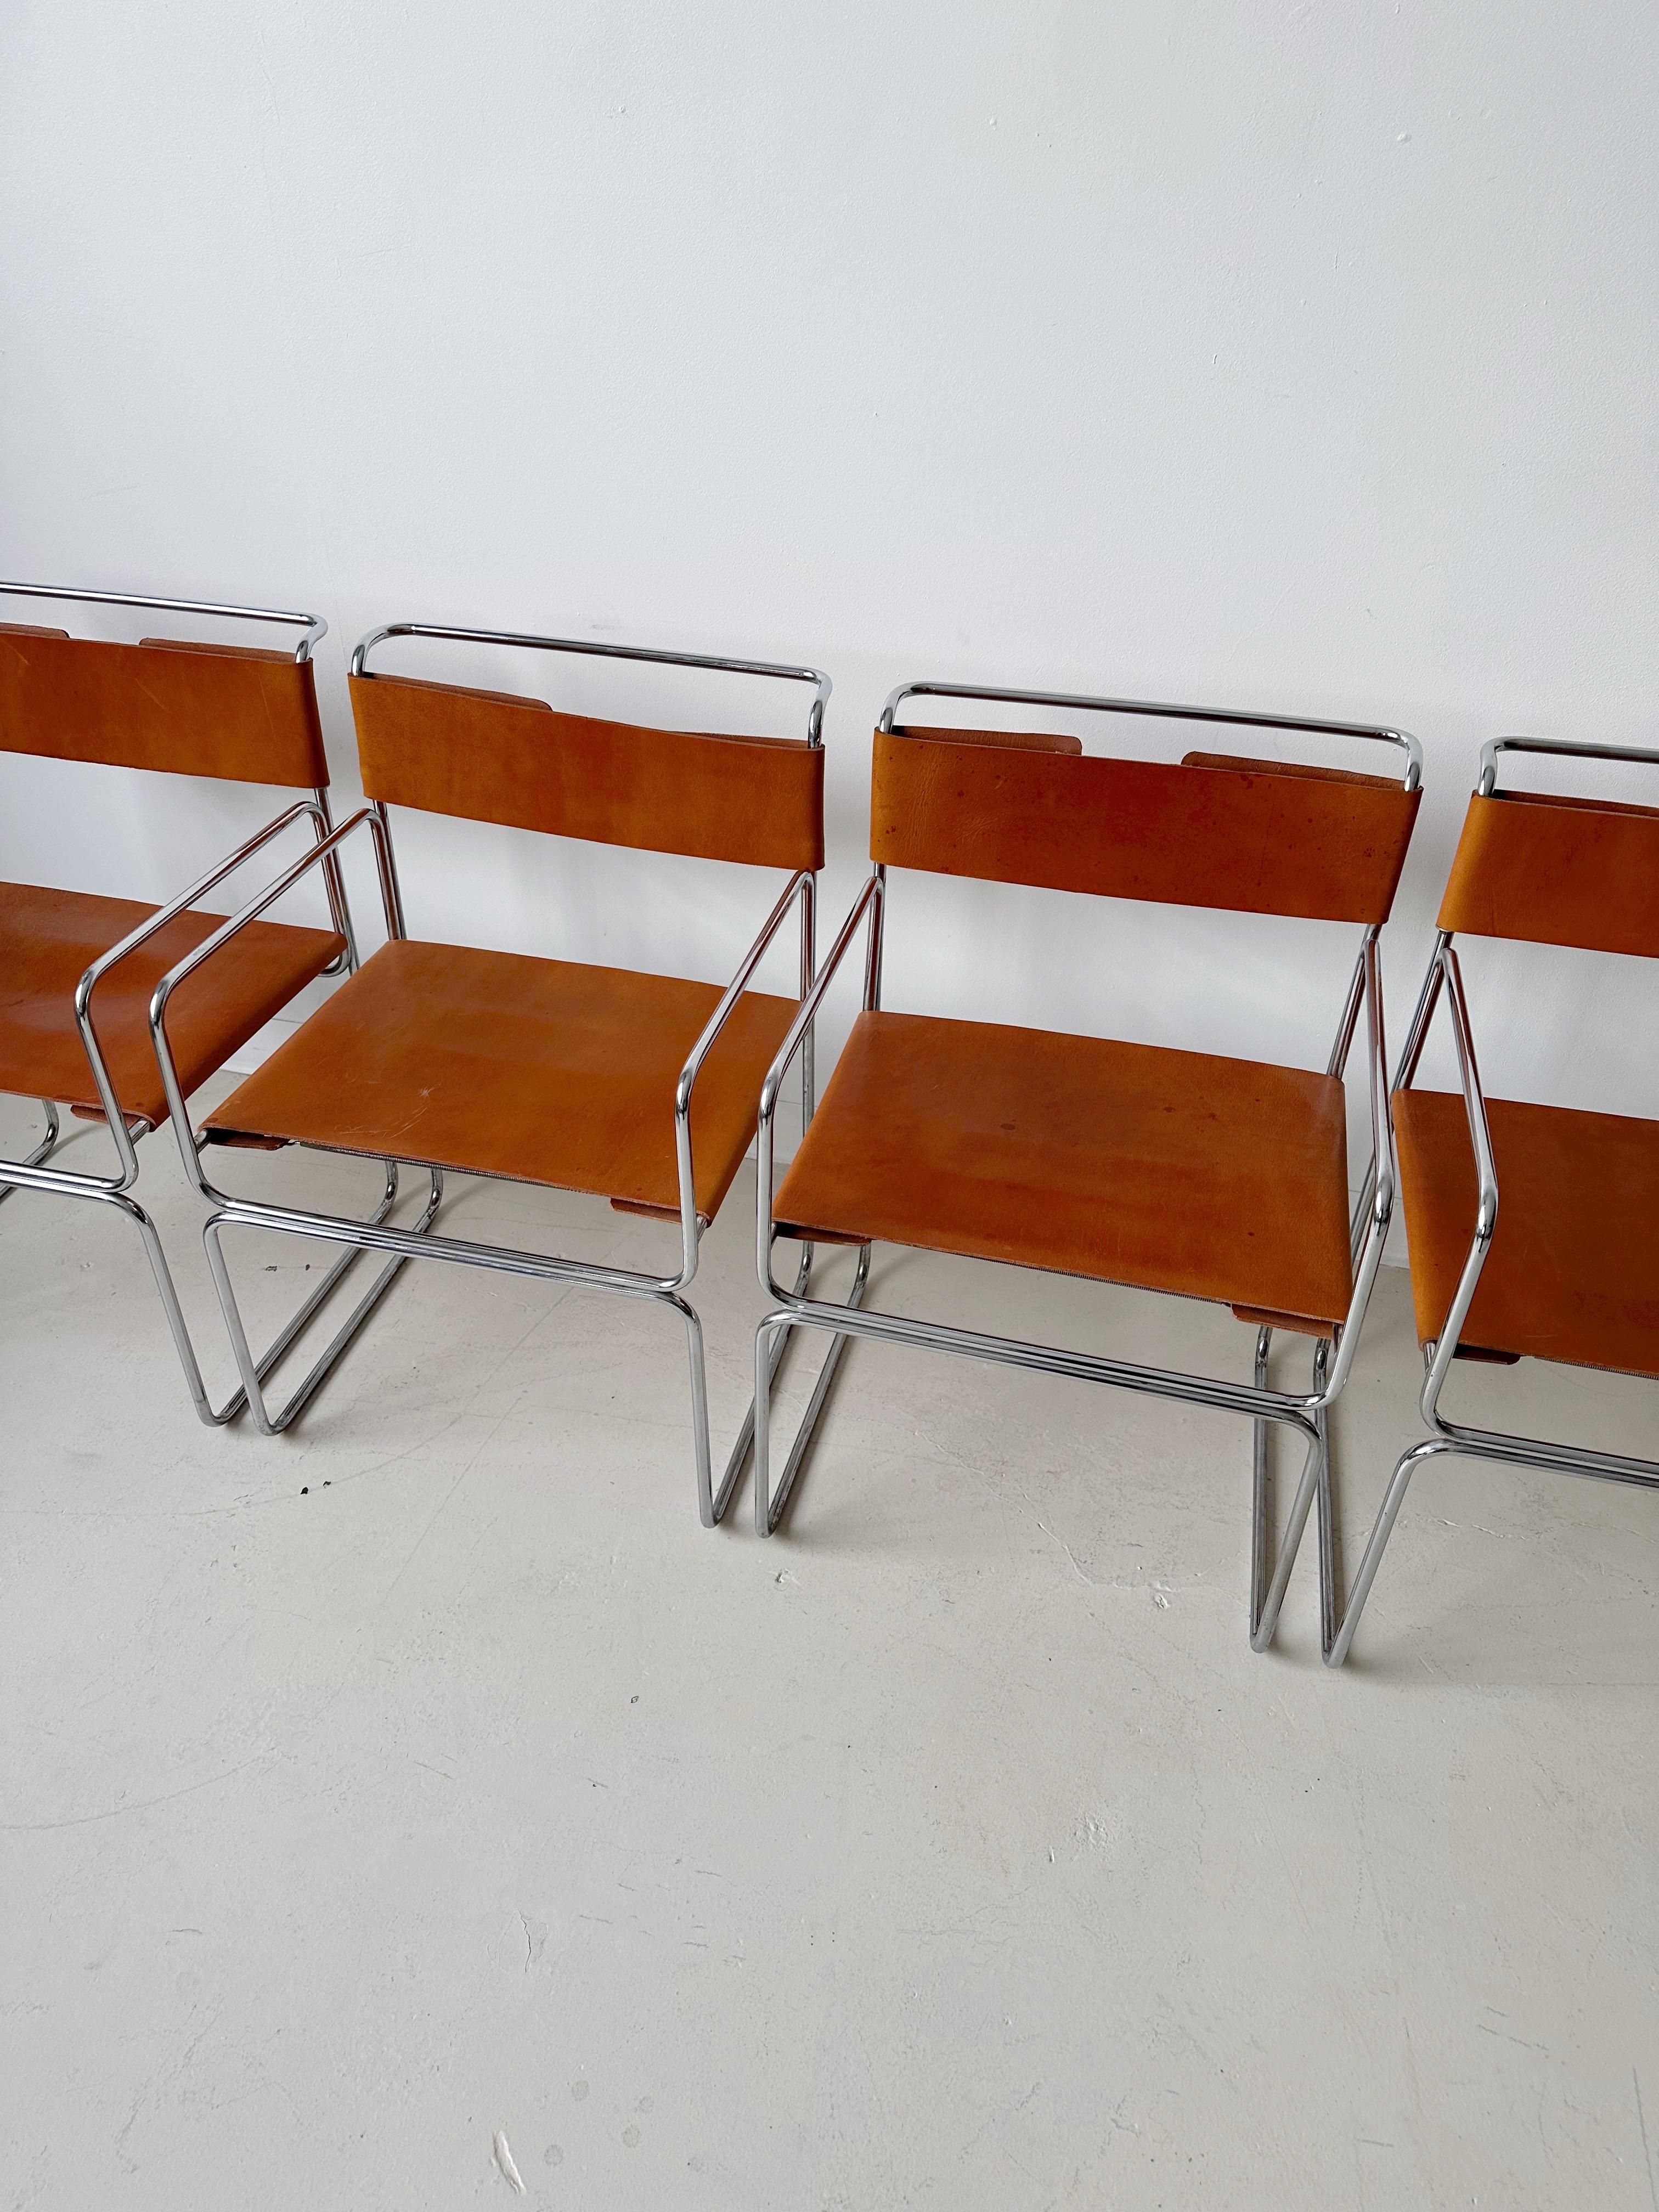 Late 20th Century Tan Leather Libellula Chairs by Giovanni Carini for Planula, 70's For Sale